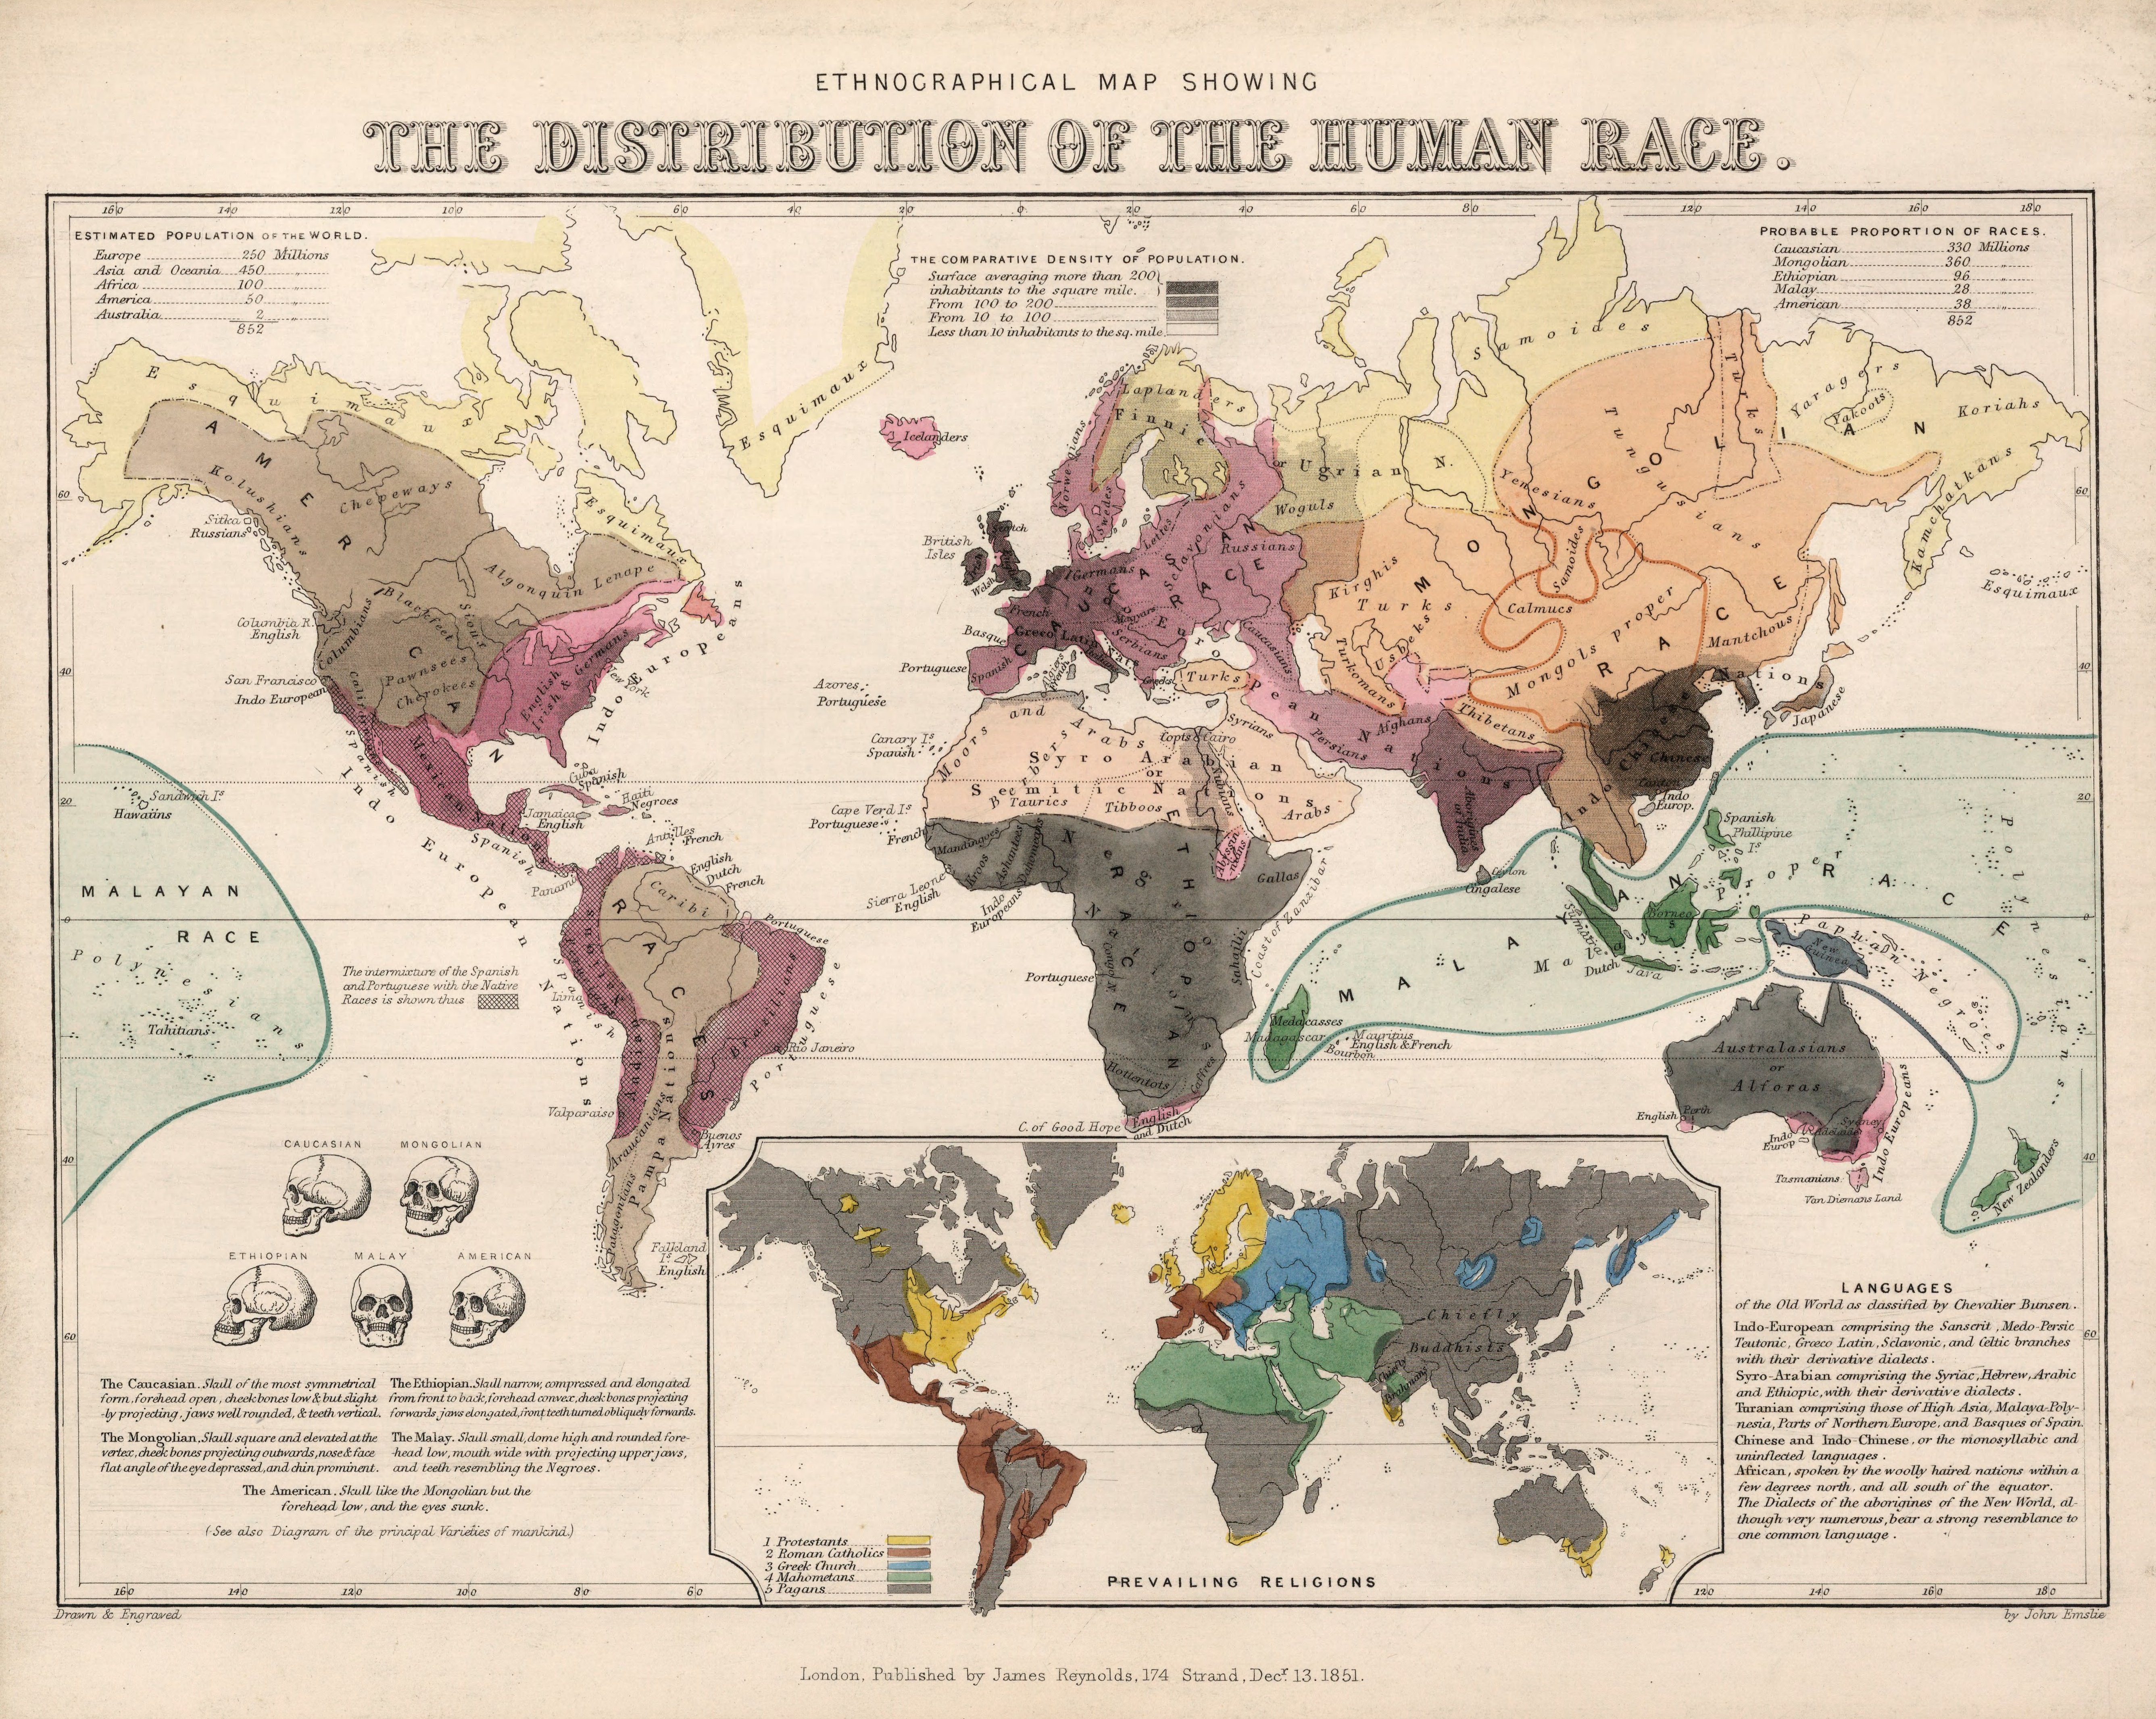 A racial map of the world by James Reynolds, 1851